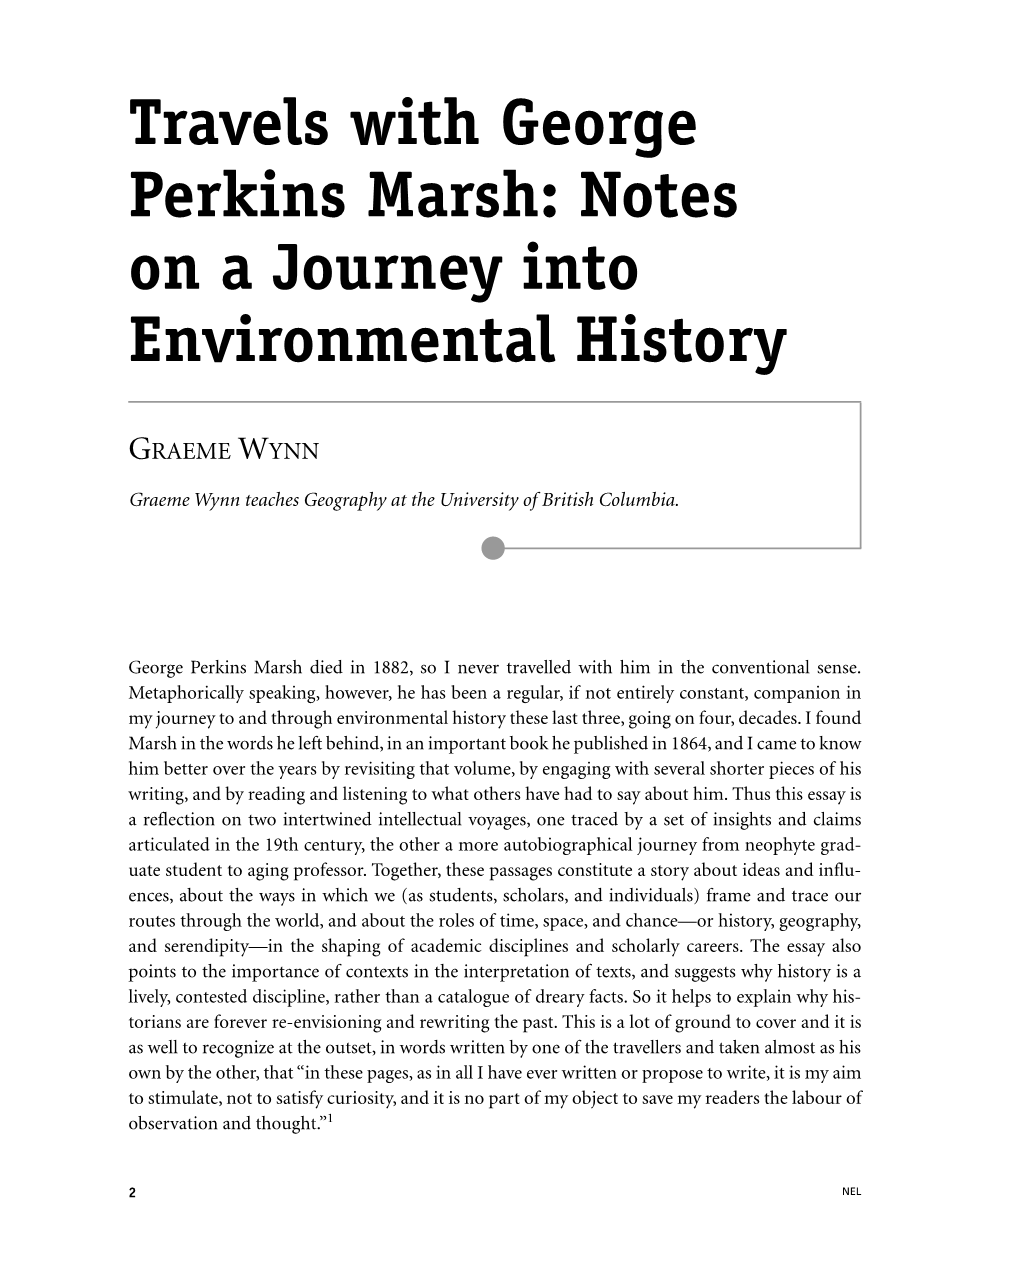 Travels with George Perkins Marsh: Notes on a Journey Into Environmental History